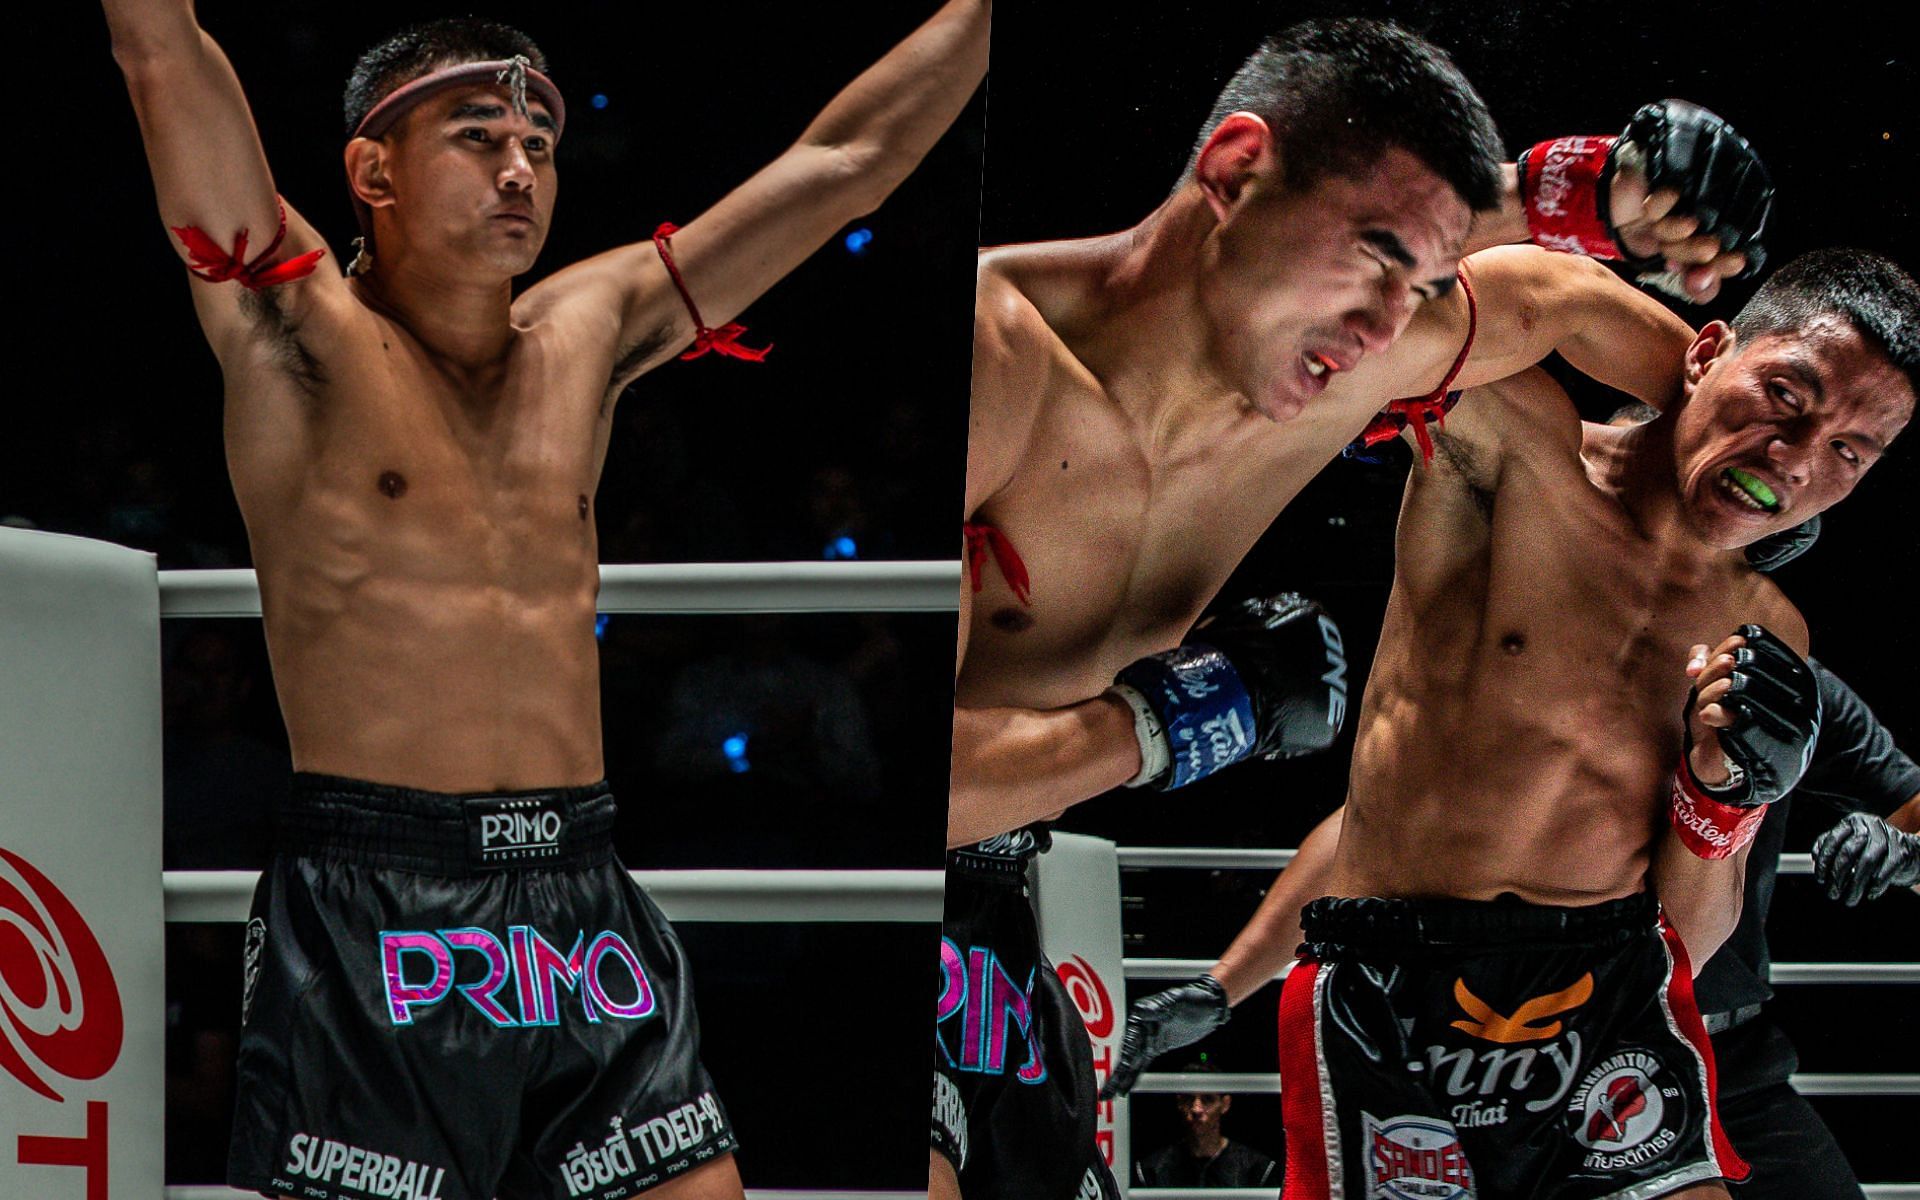 Superball Tded99 (L) and Kongklai Annymuaythai put on a show at ONE Friday Fights 5. | Photo by ONE Championship